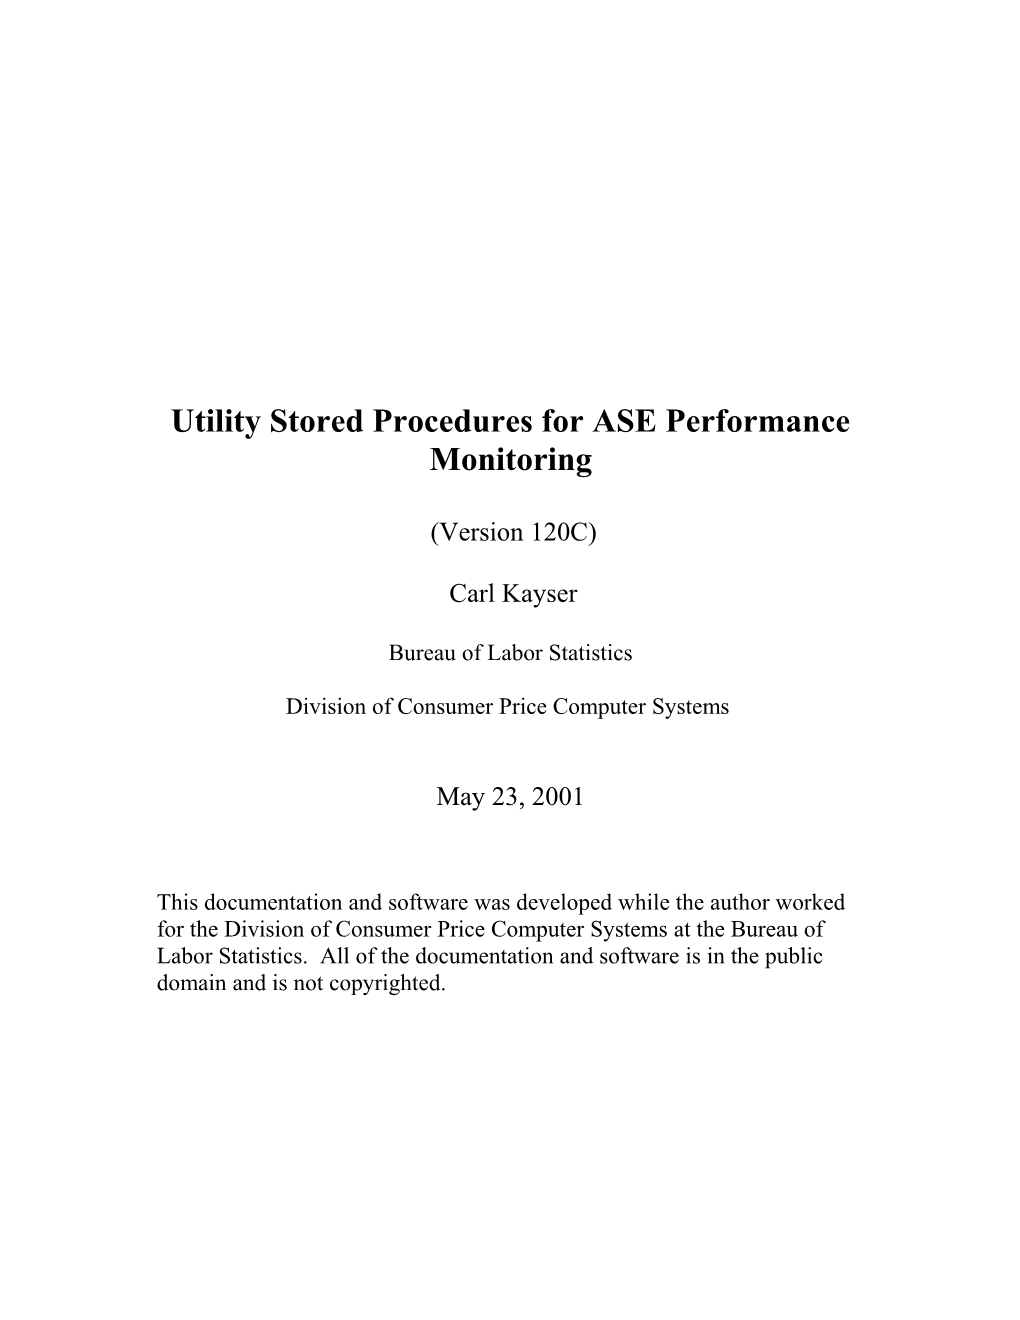 Utility Stored Procedures for ASE Performance Monitoring